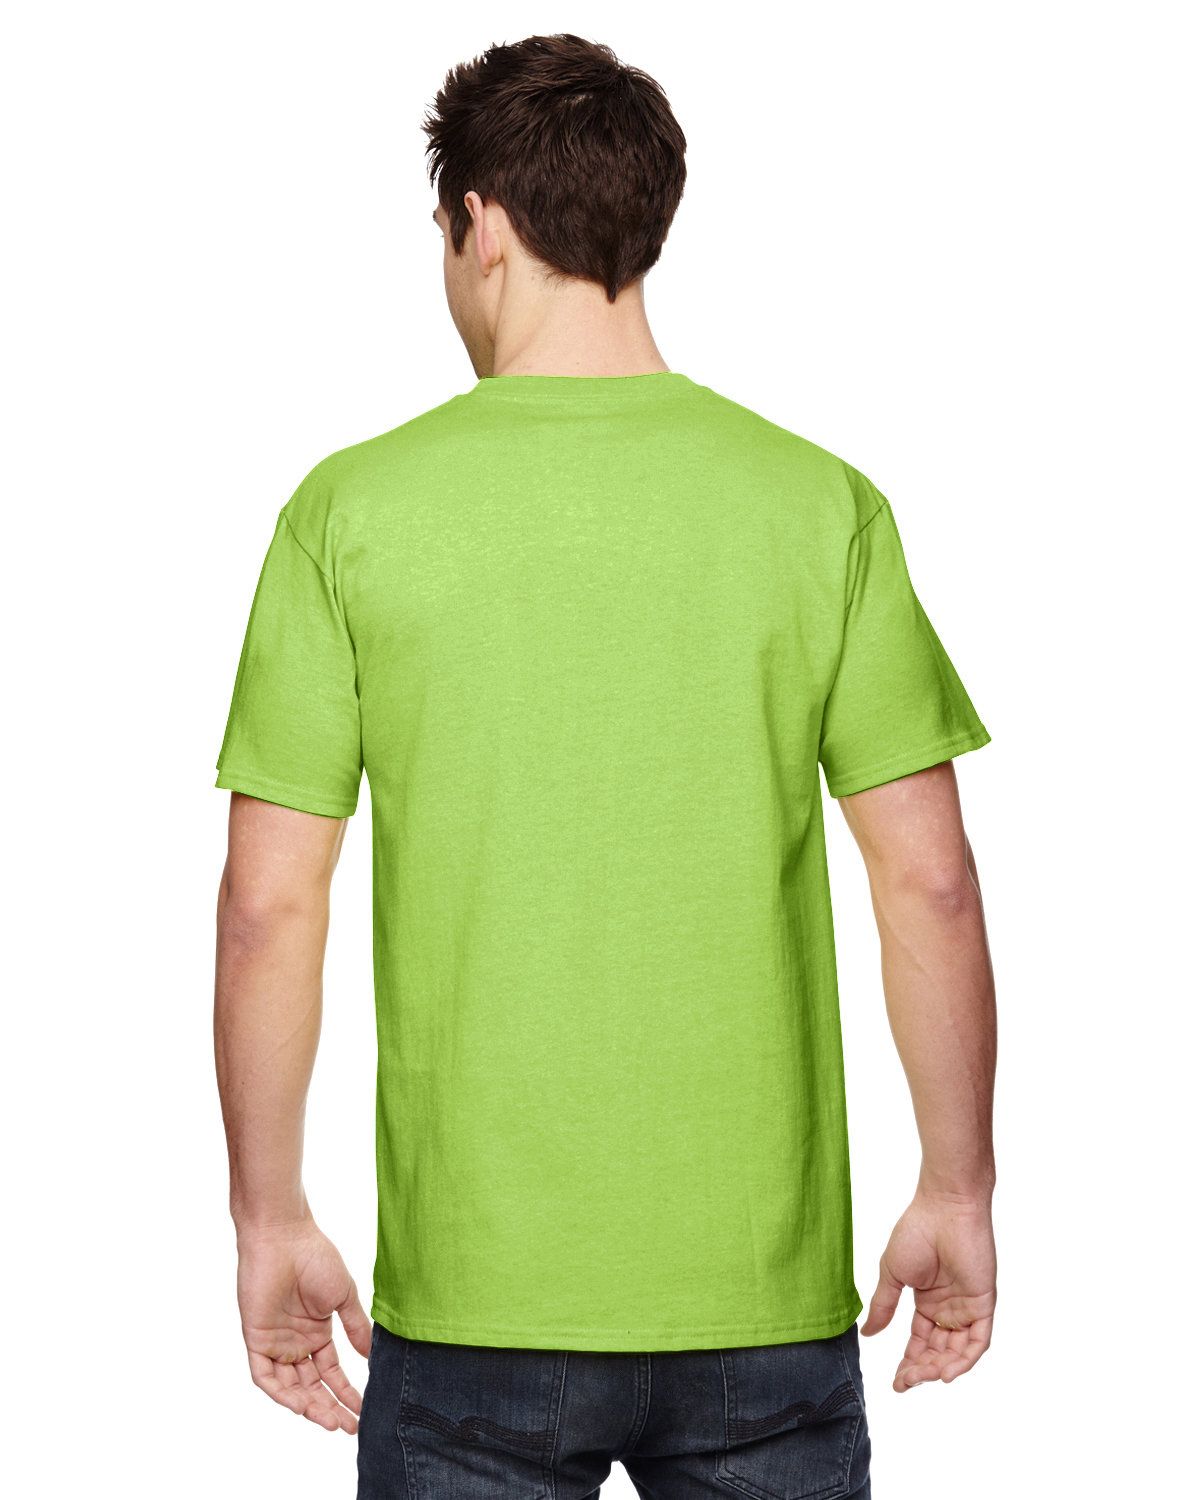 'Fruit of the Loom 3931 Adult HD Cotton 5.0 Oz T-Shirt'